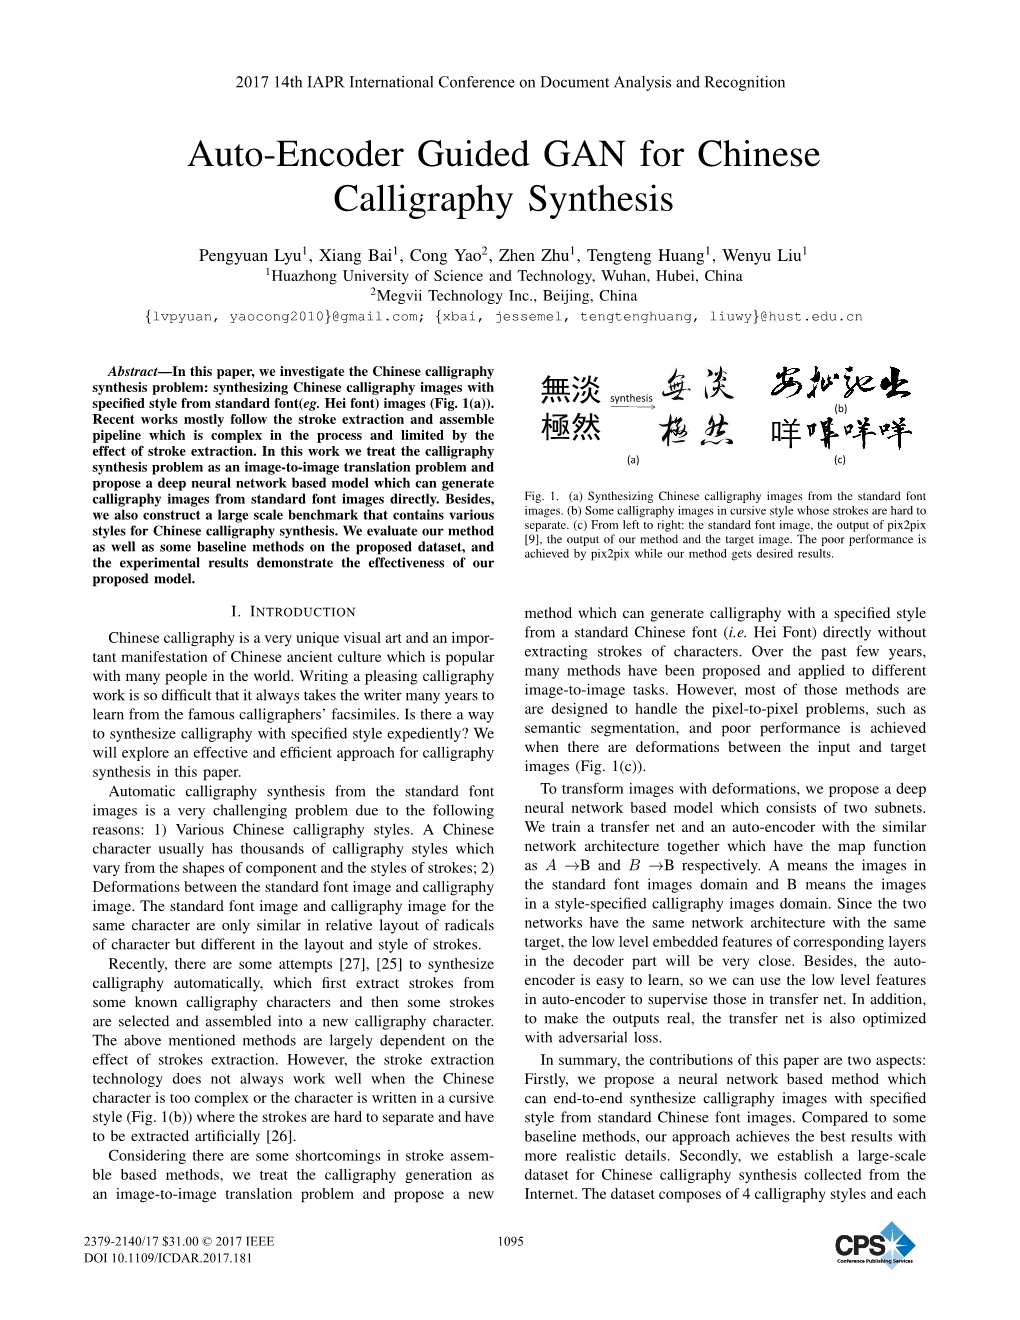 Auto-Encoder Guided GAN for Chinese Calligraphy Synthesis